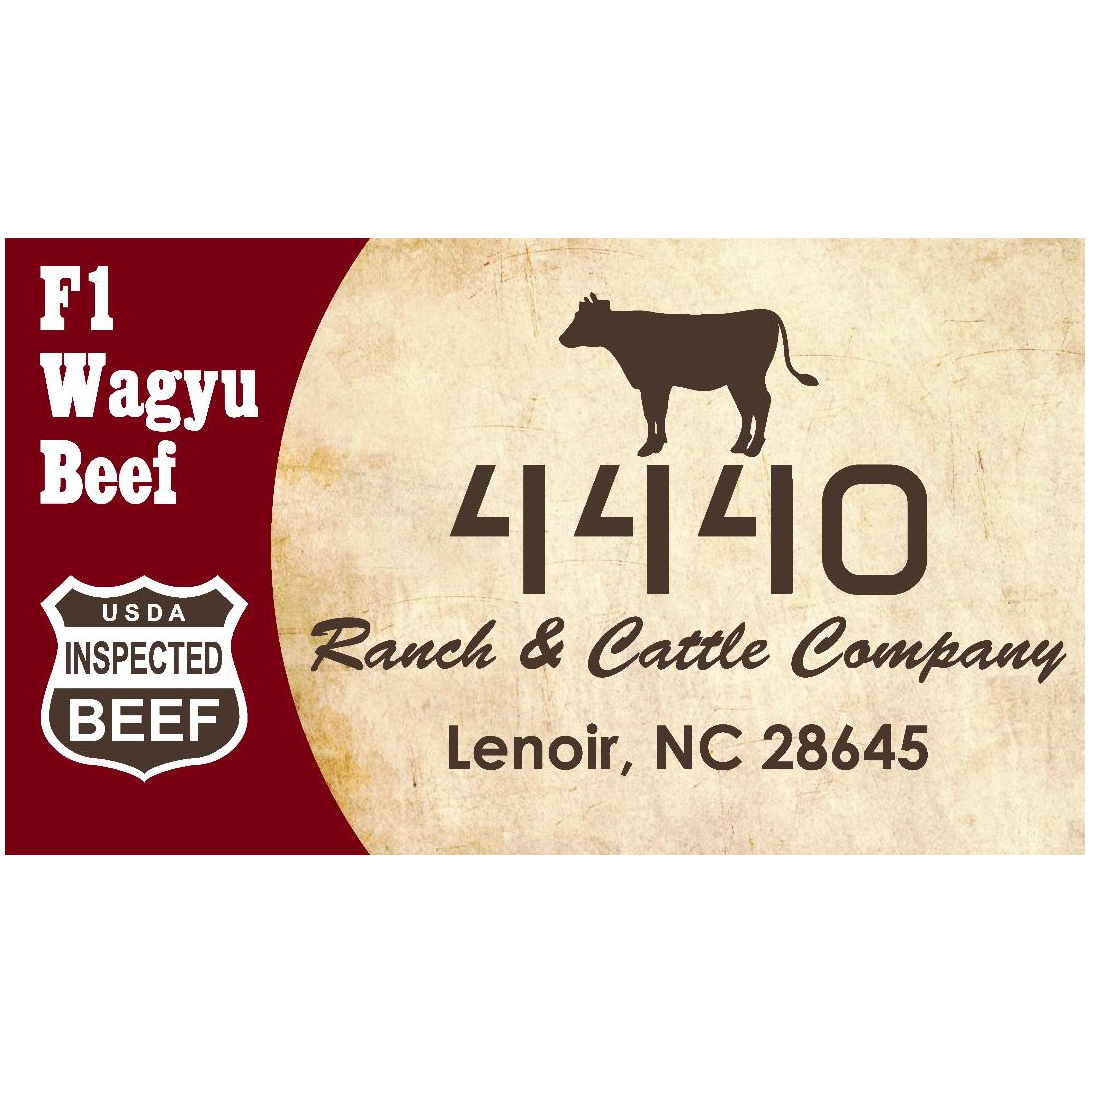 4440 Ranch and Cattle Co, LLC